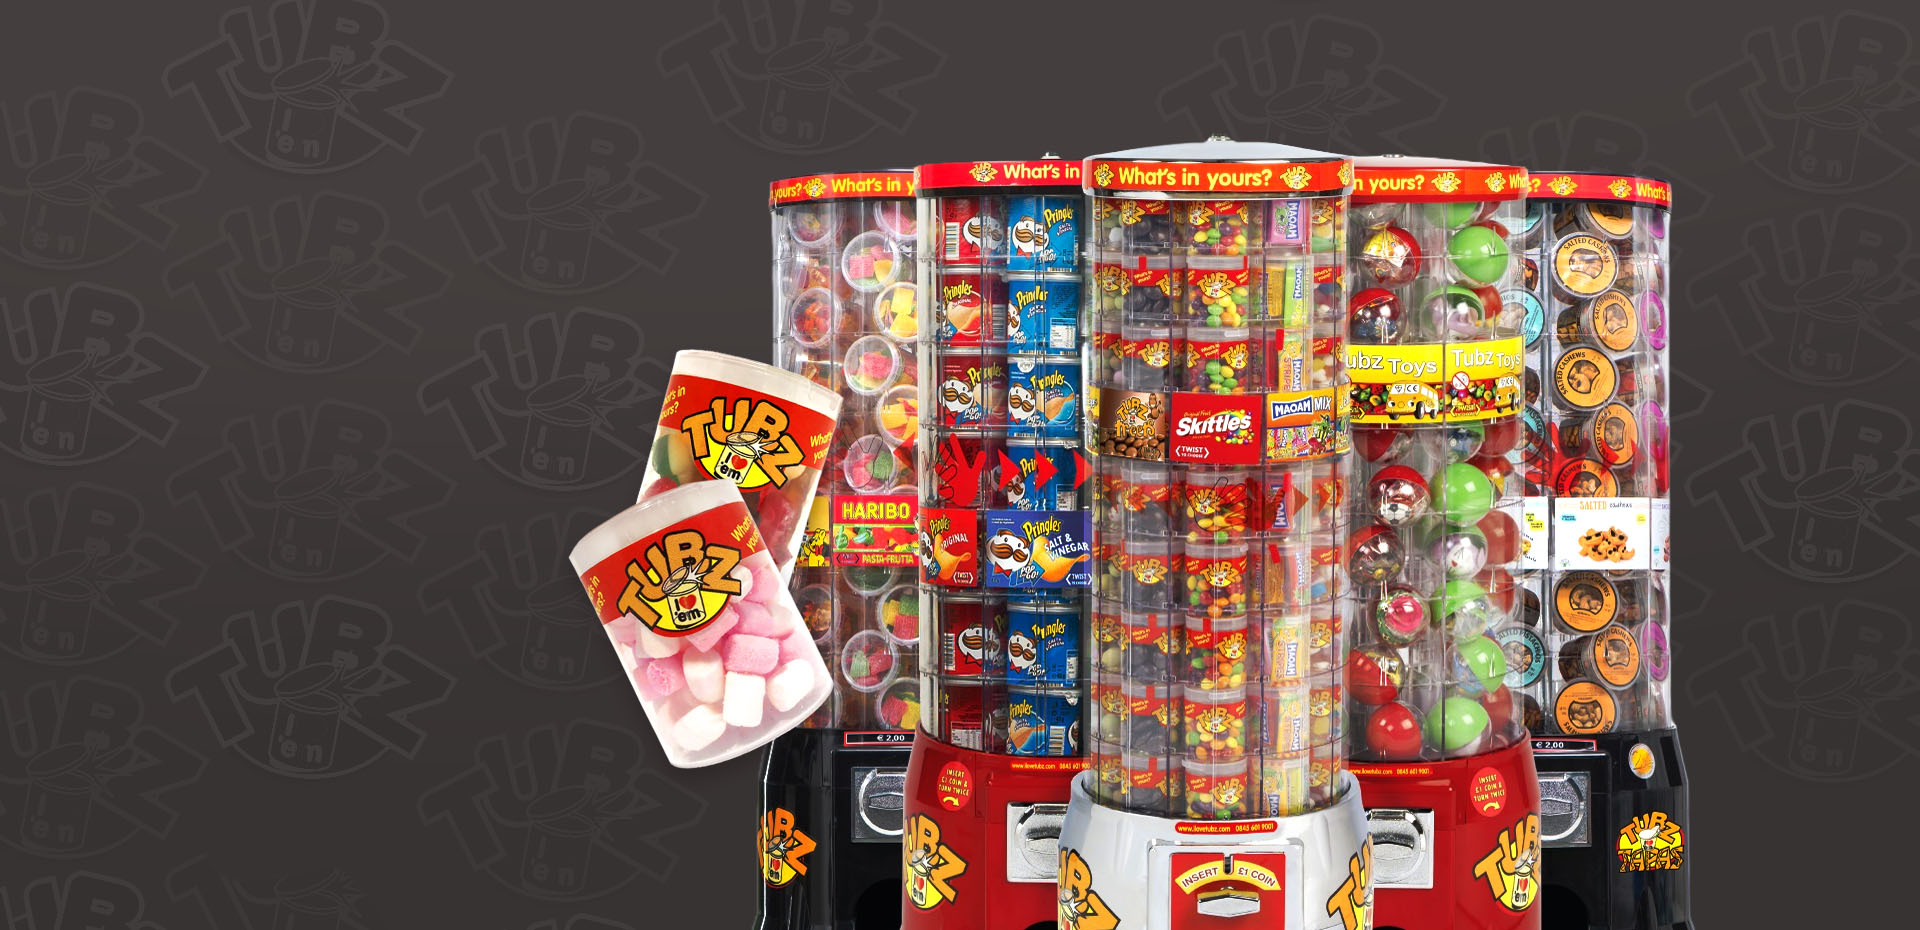 Installers Of Sweets Vending Machines For Soft Play Establishments Leicestershire